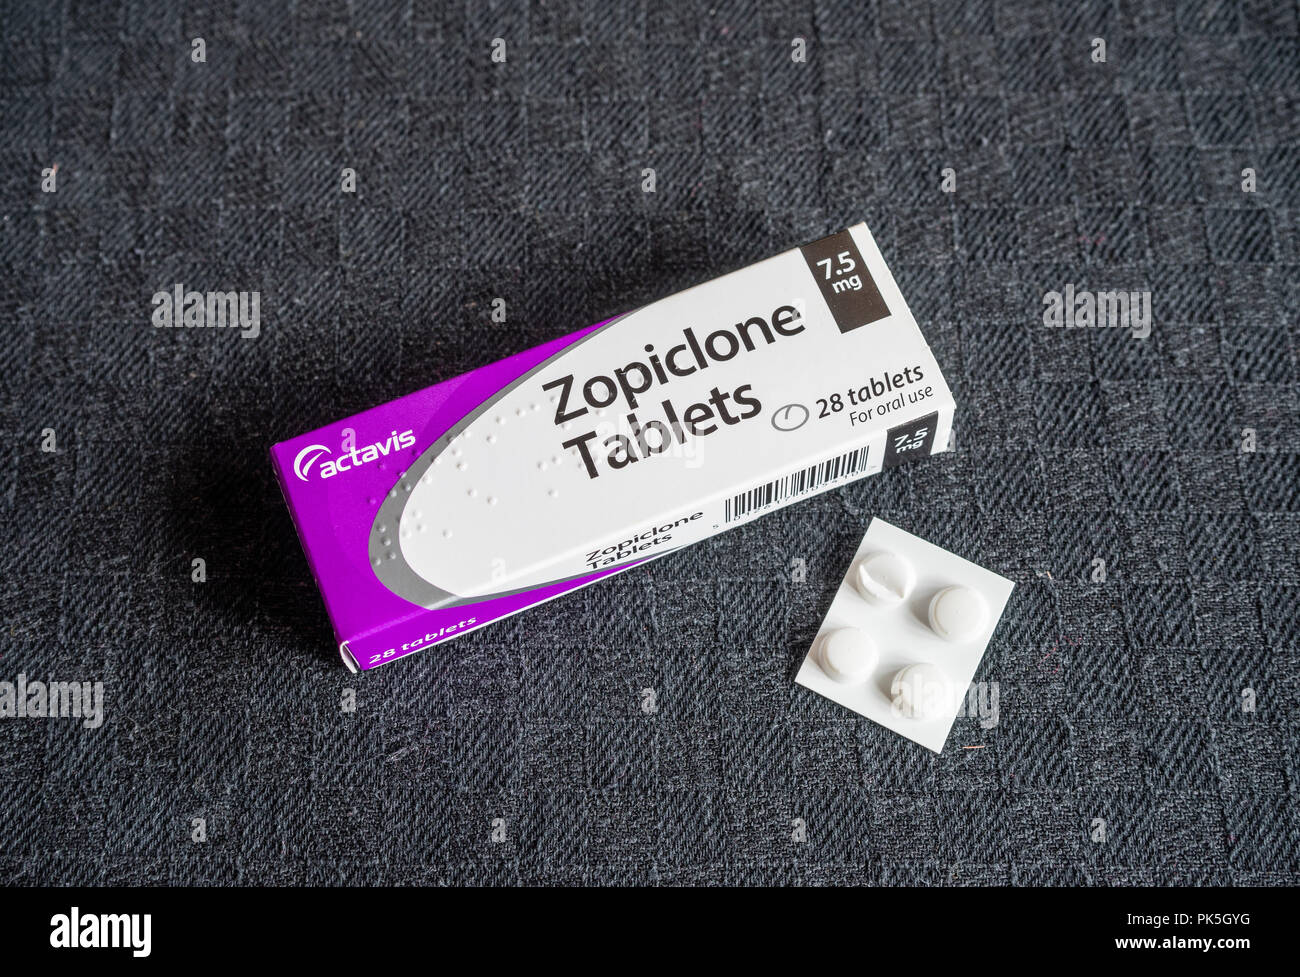 THIS IS A STOCK PHOTO - A box / pack of 28 x 7.5 mg Zopiclone prescription sleeping tablets against black background Stock Photo